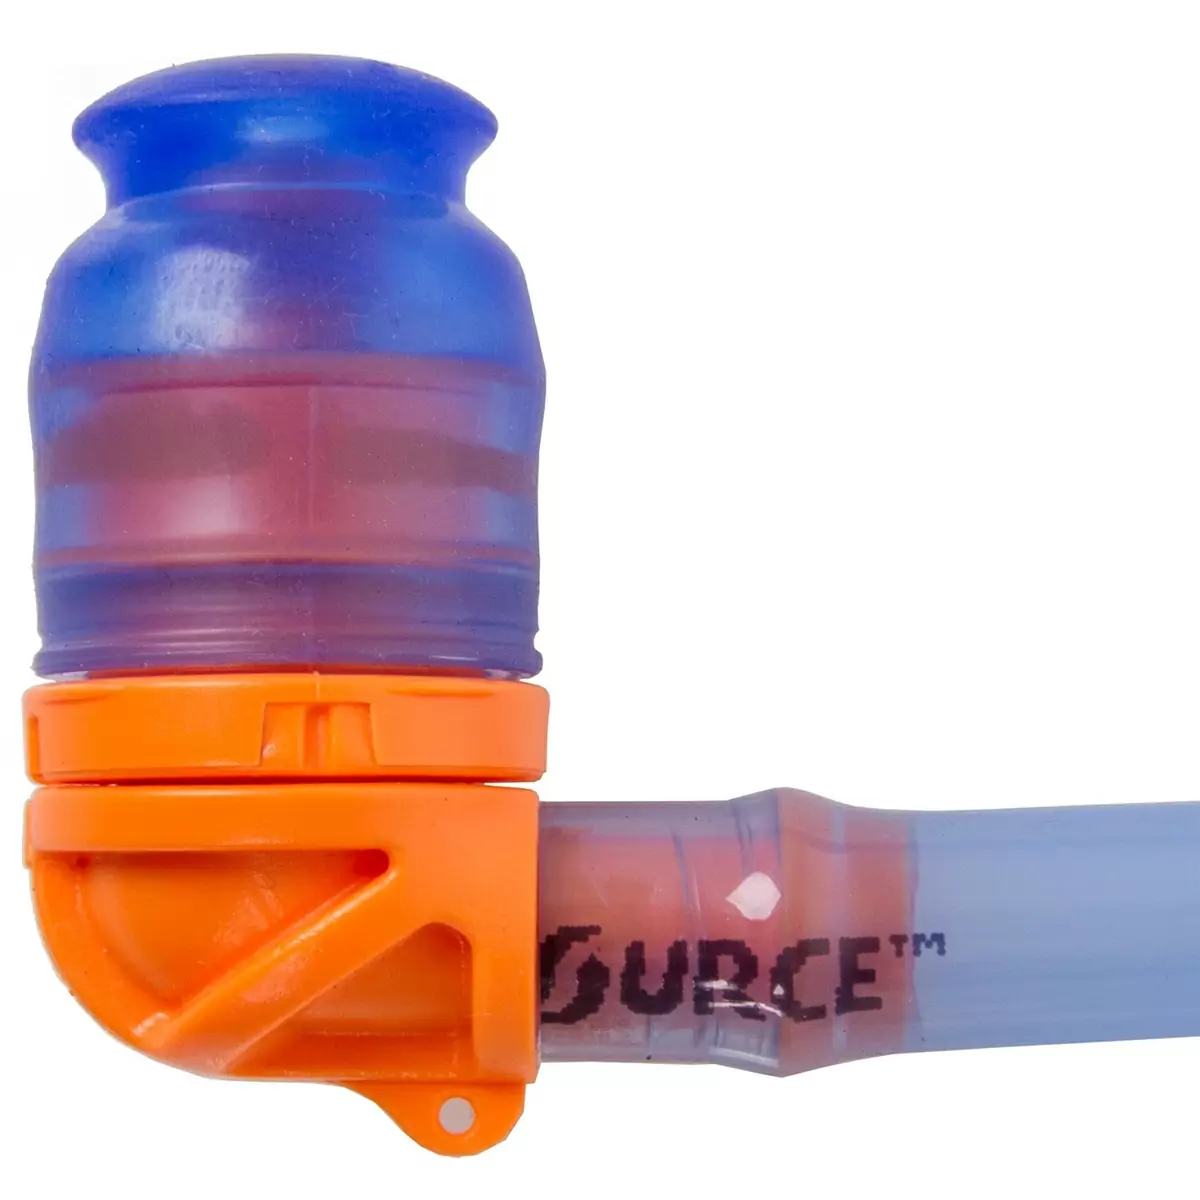 Spare valve for hydration bag - image